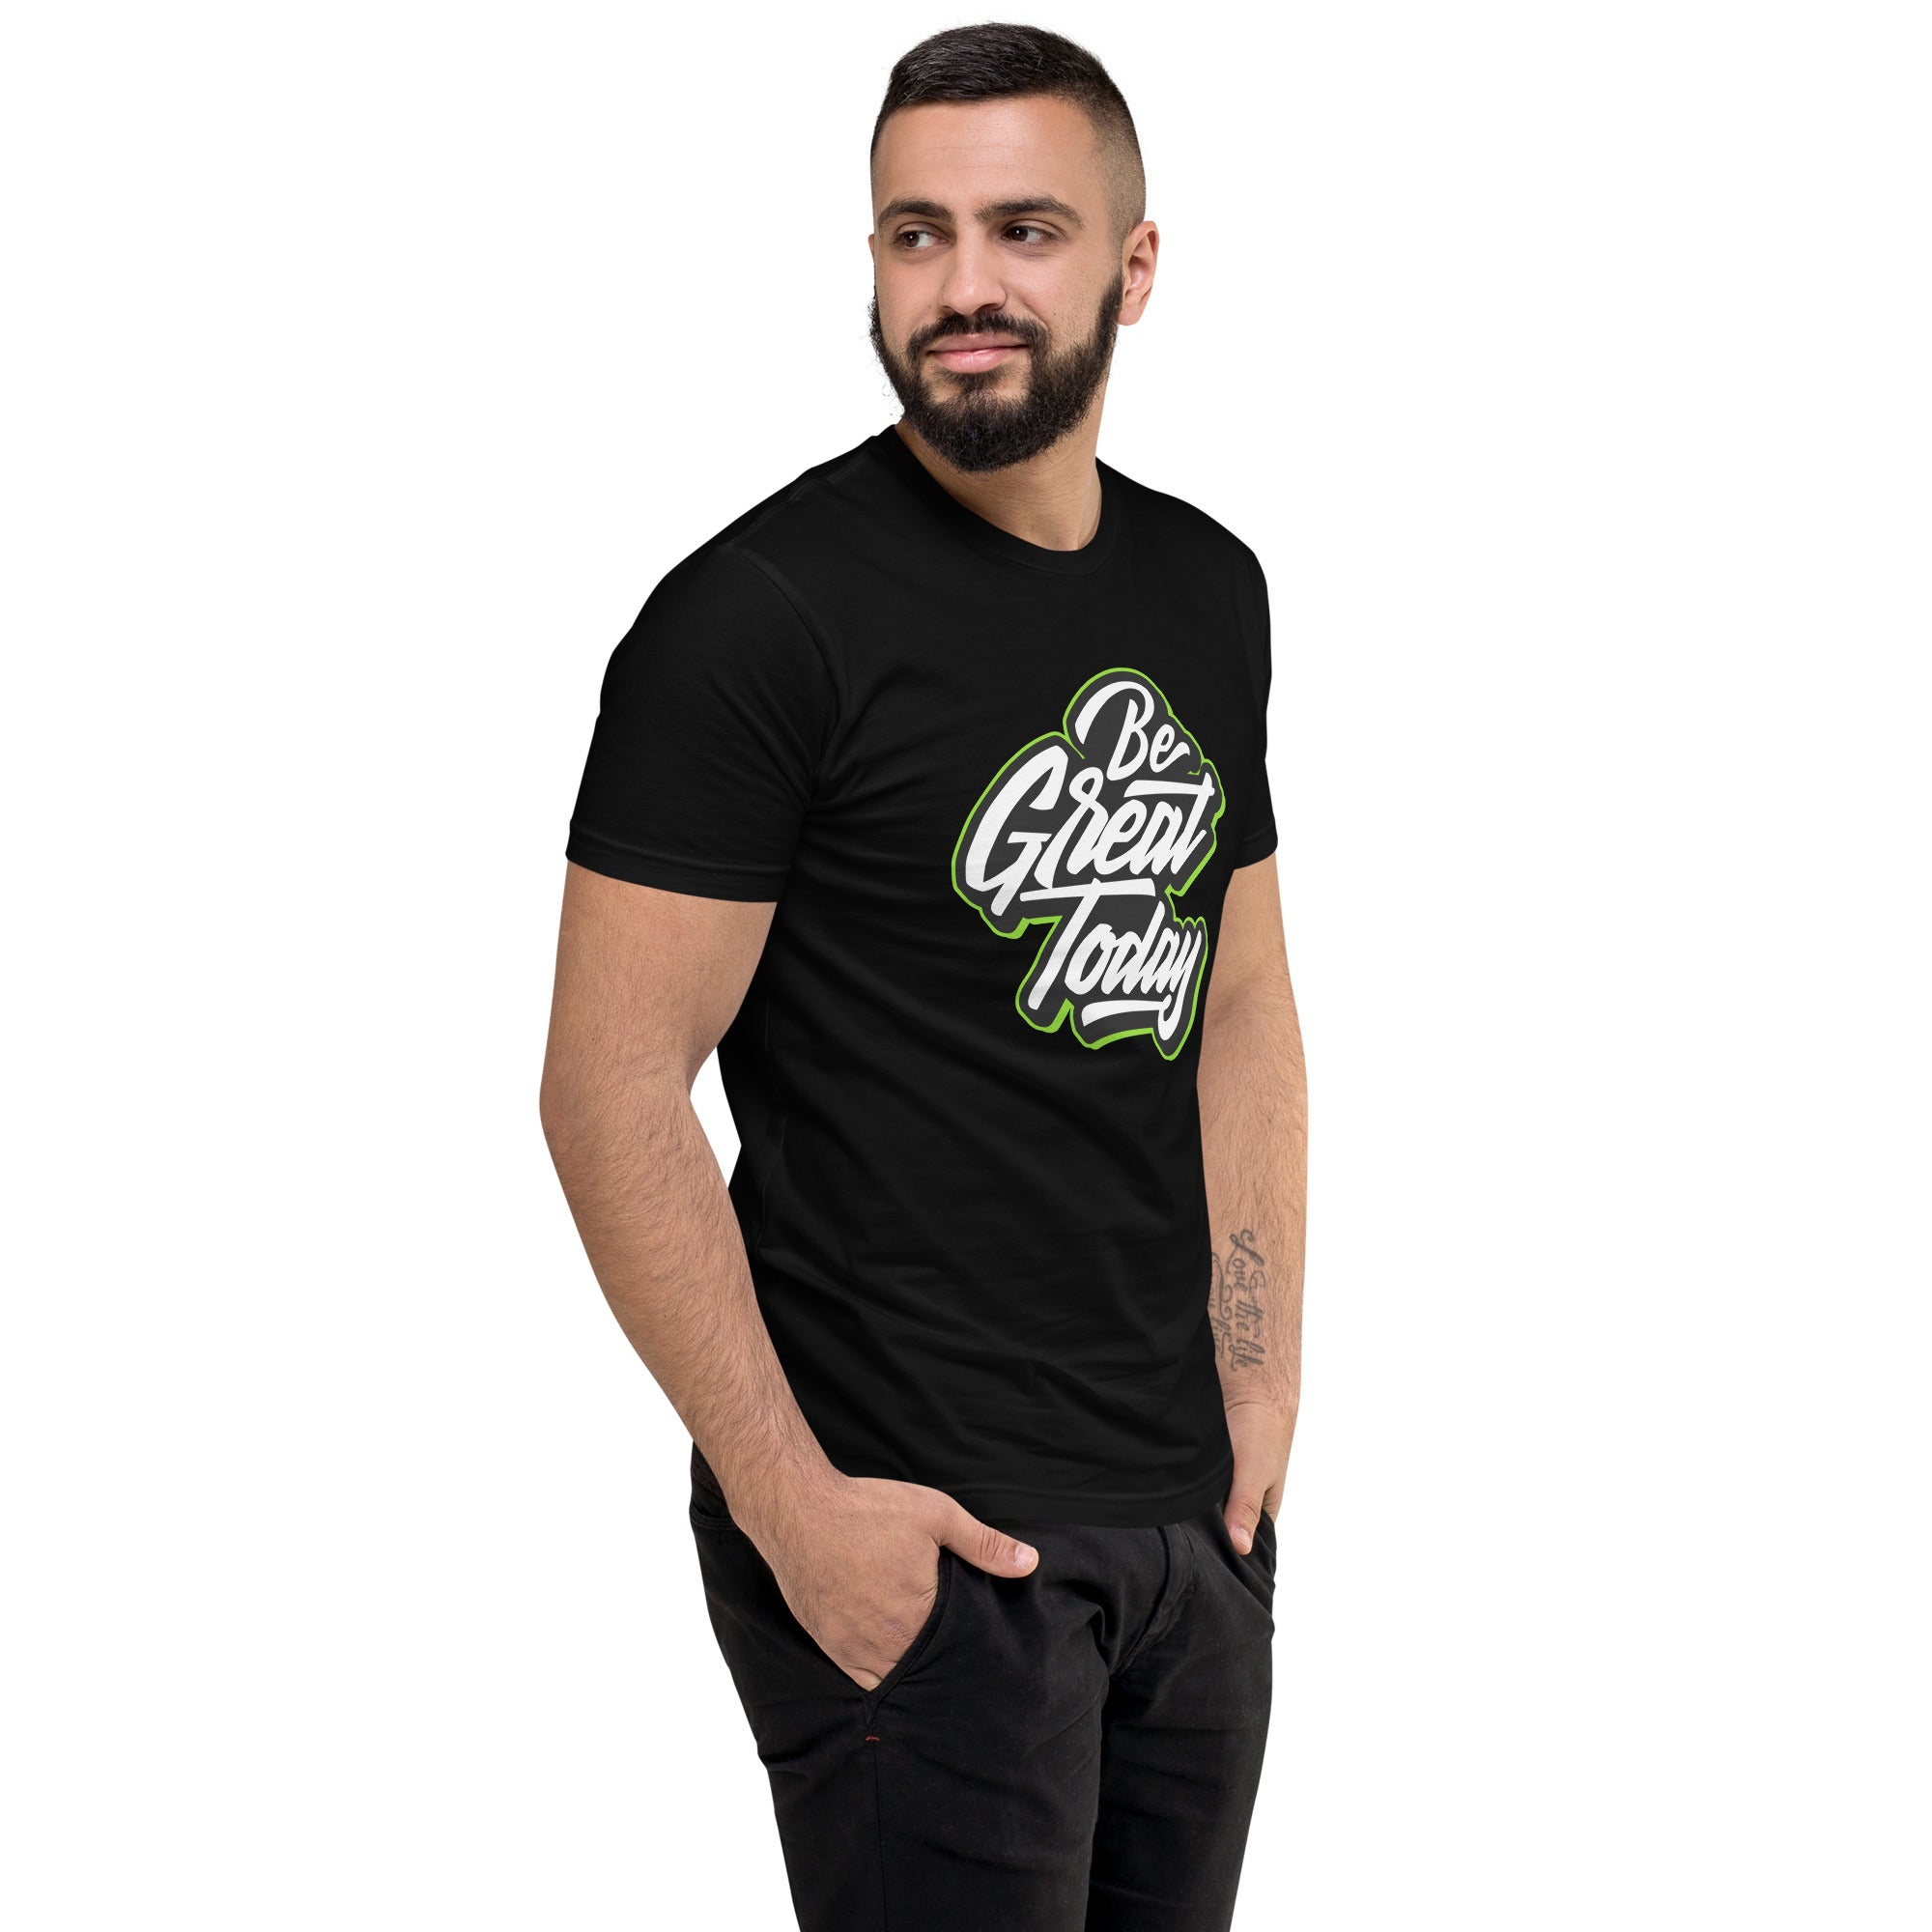 Be Great Today Short Sleeve T-shirt